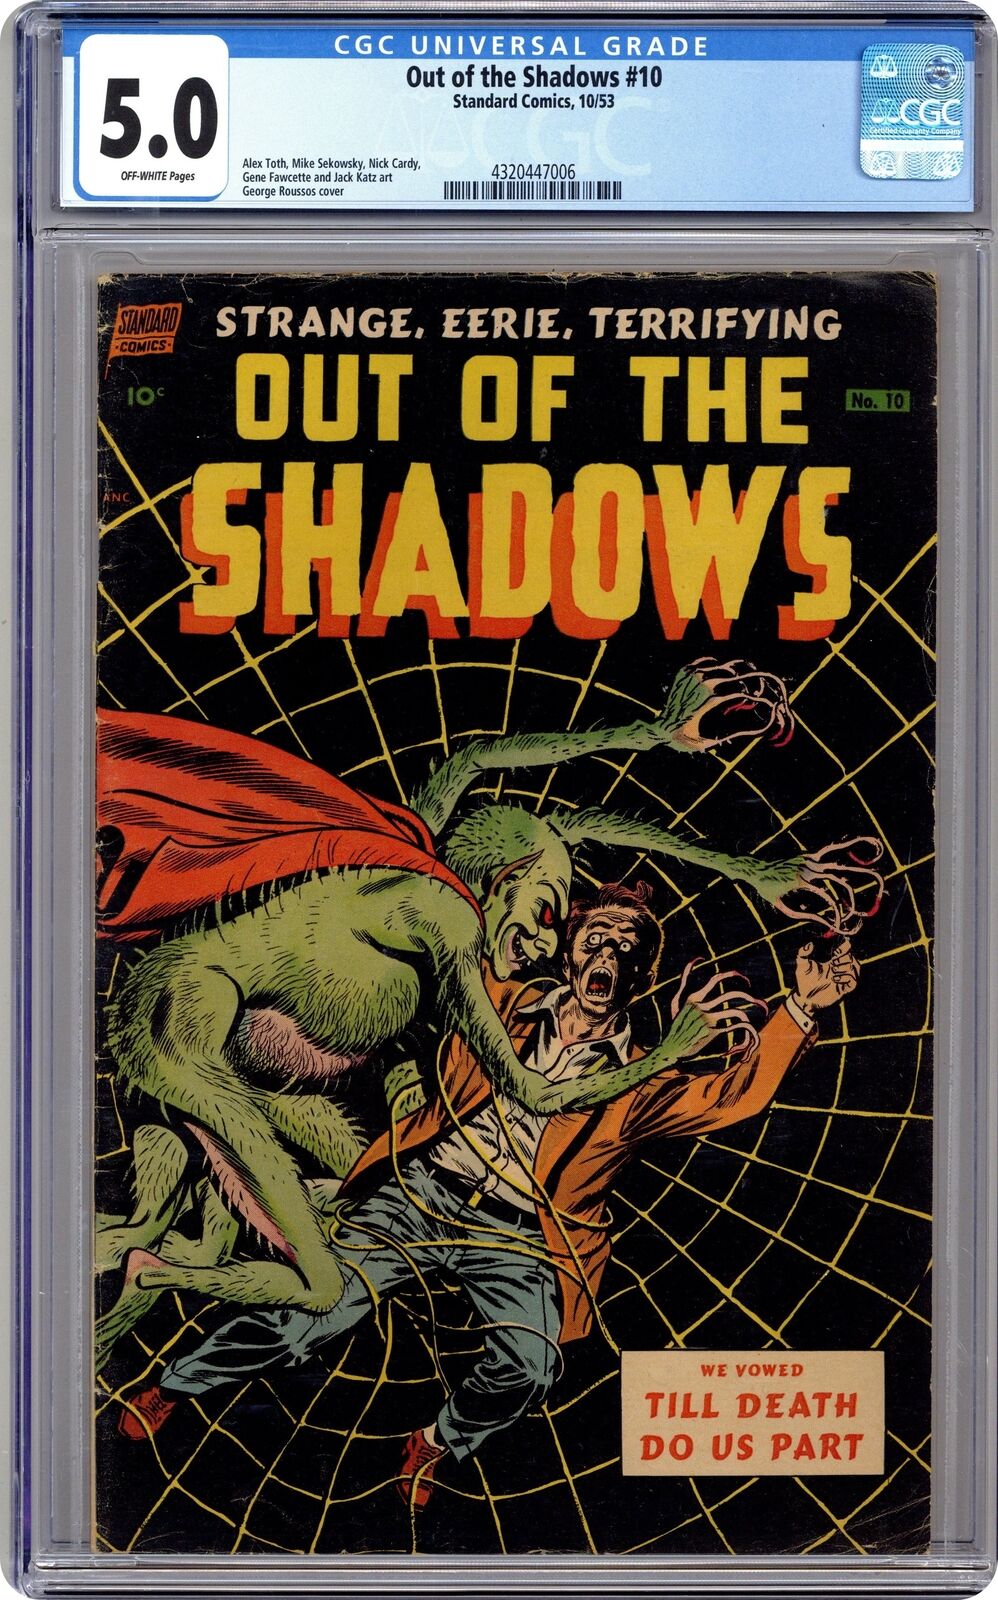 Out of the Shadows #10 CGC 5.0 1953 4320447006